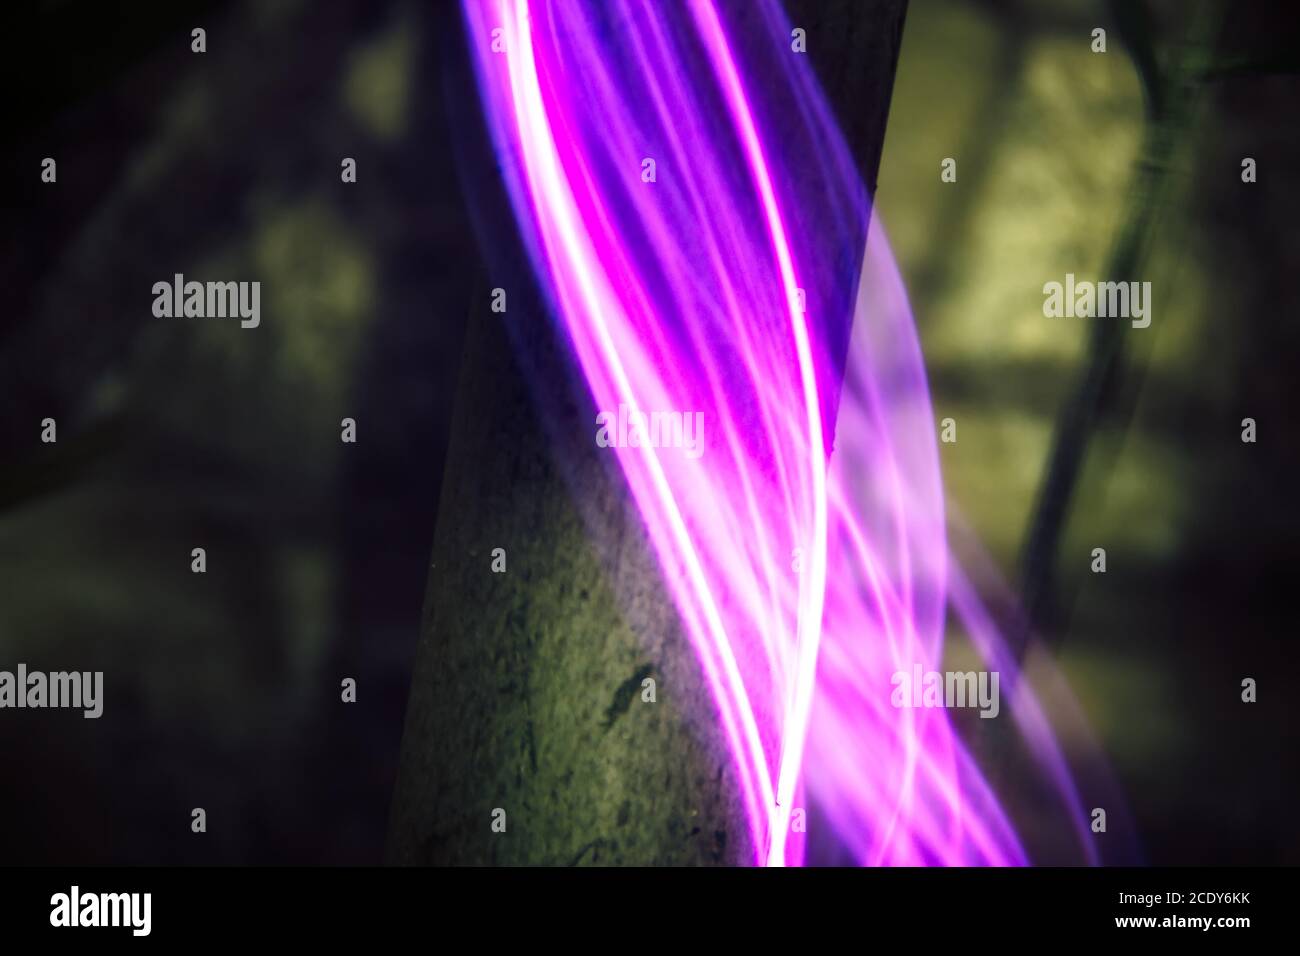 Palm tree trunk in neon light at night. Stock Photo